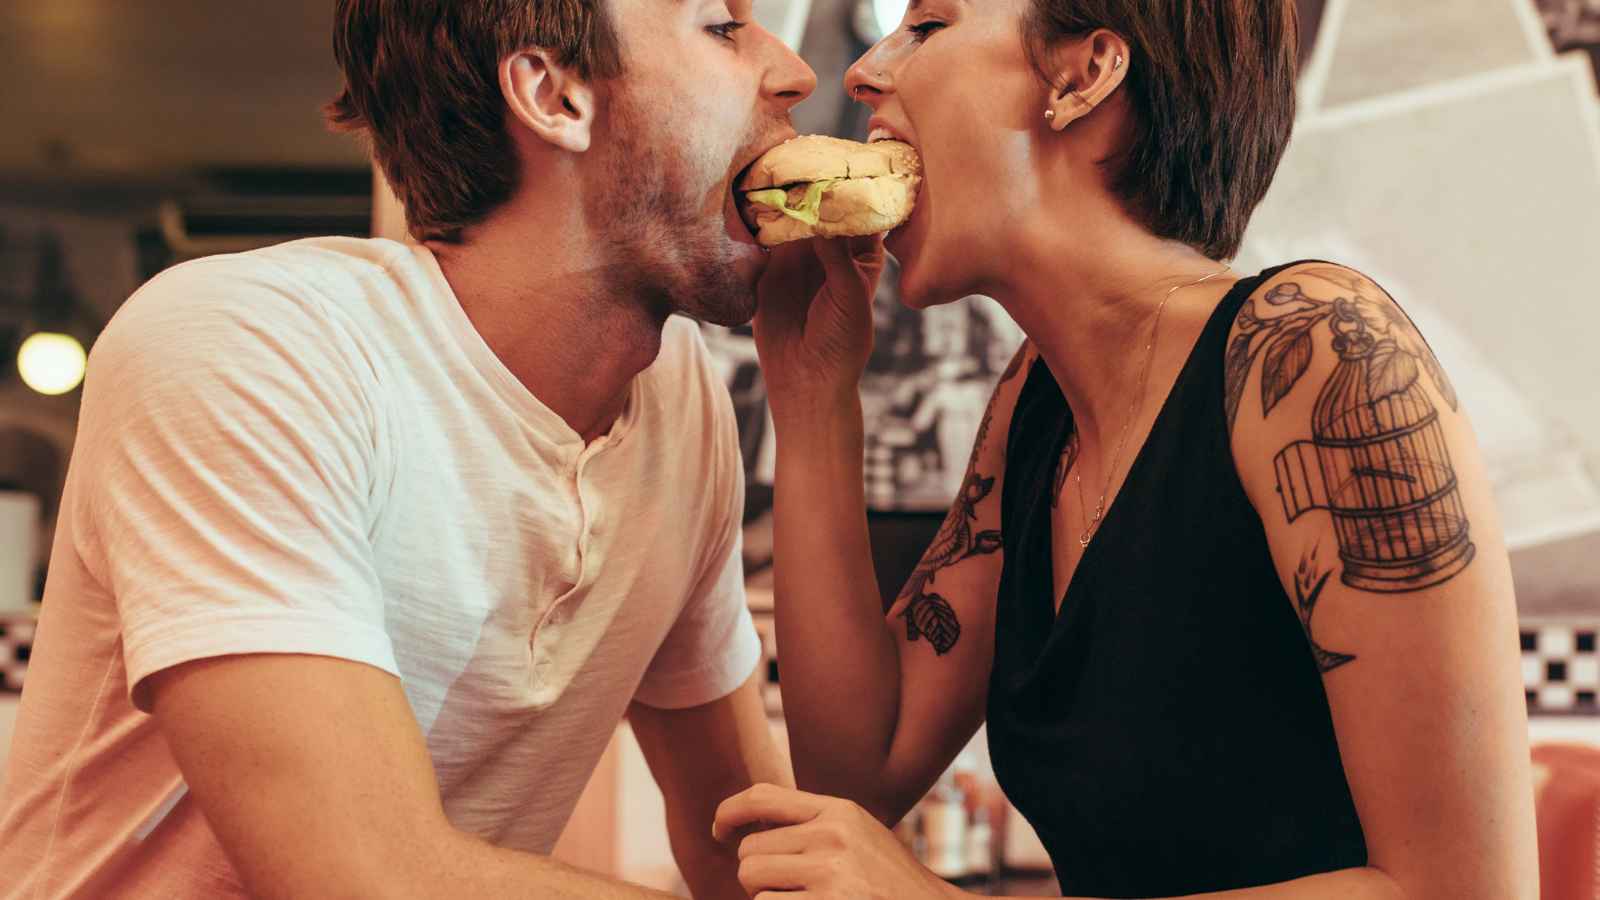 The 15 Things Women Only Do With the Men They Love